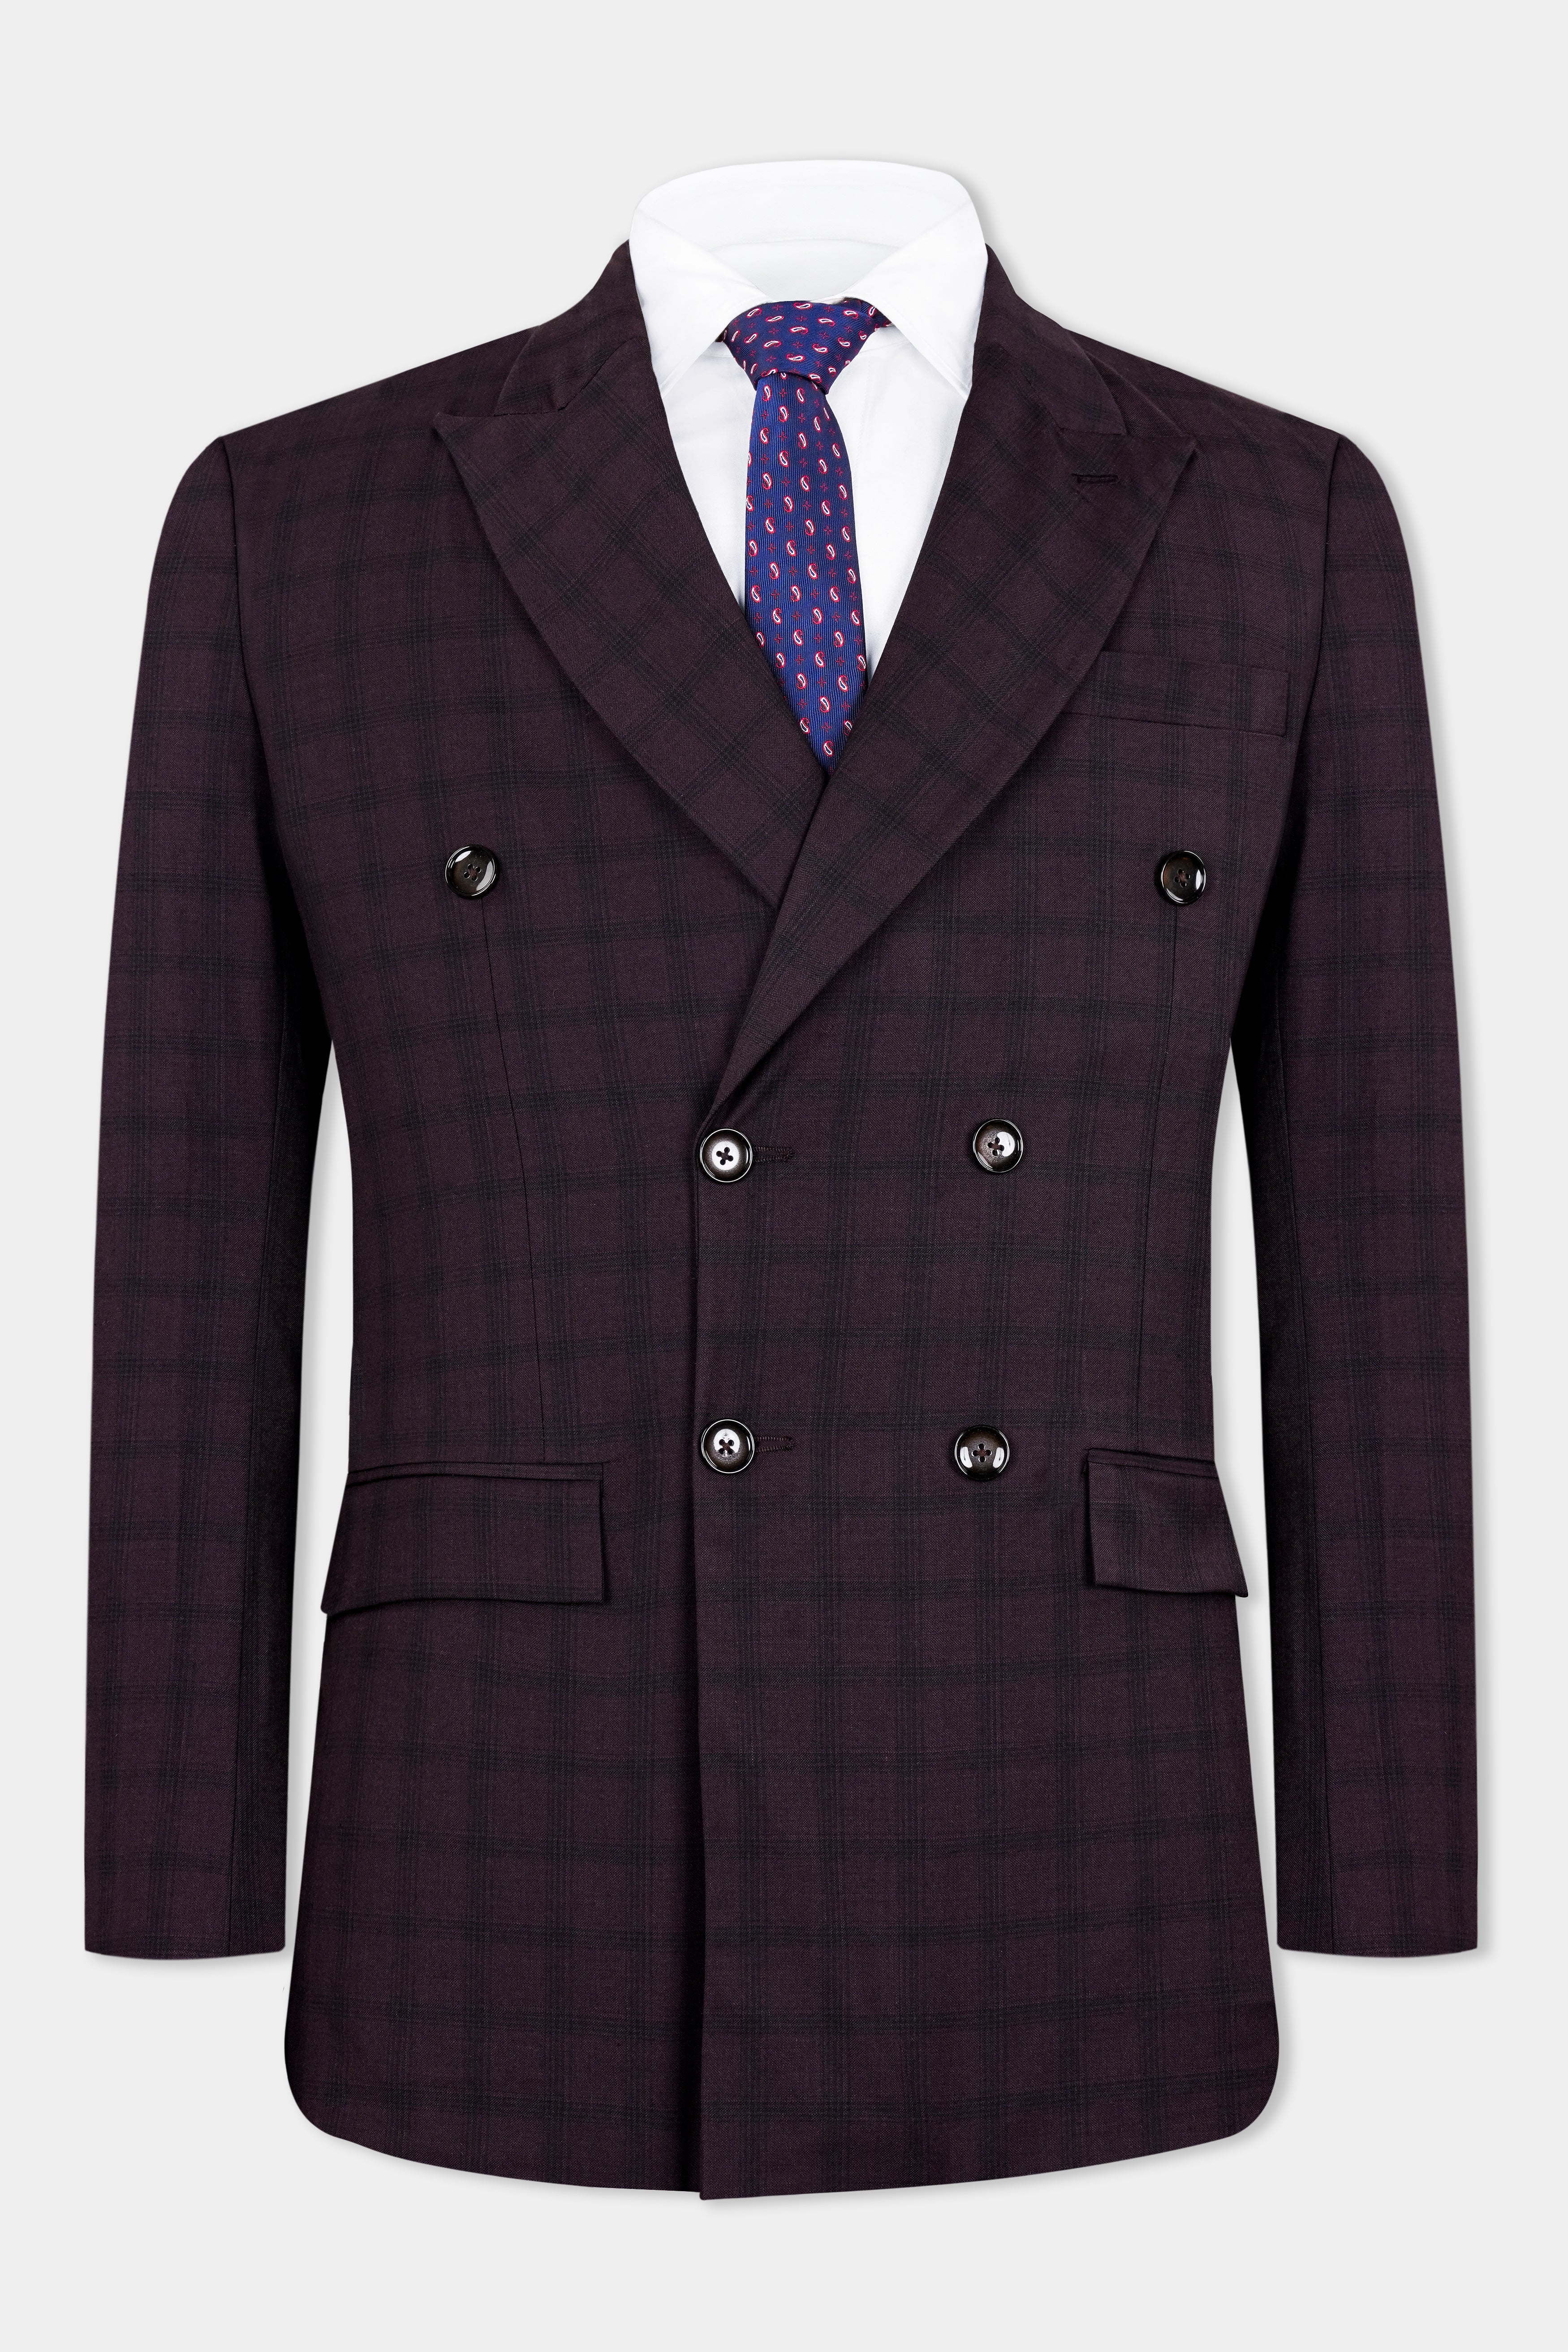 Cinder Purple Checkered Double Breasted Wool Rich Blazer BL2916-DB-36, BL2916-DB-38, BL2916-DB-40, BL2916-DB-42, BL2916-DB-44, BL2916-DB-46, BL2916-DB-48, BL2916-DB-50, BL2916-DB-52, BL2916-DB-54, BL2916-DB-56, BL2916-DB-58, BL2916-DB-60